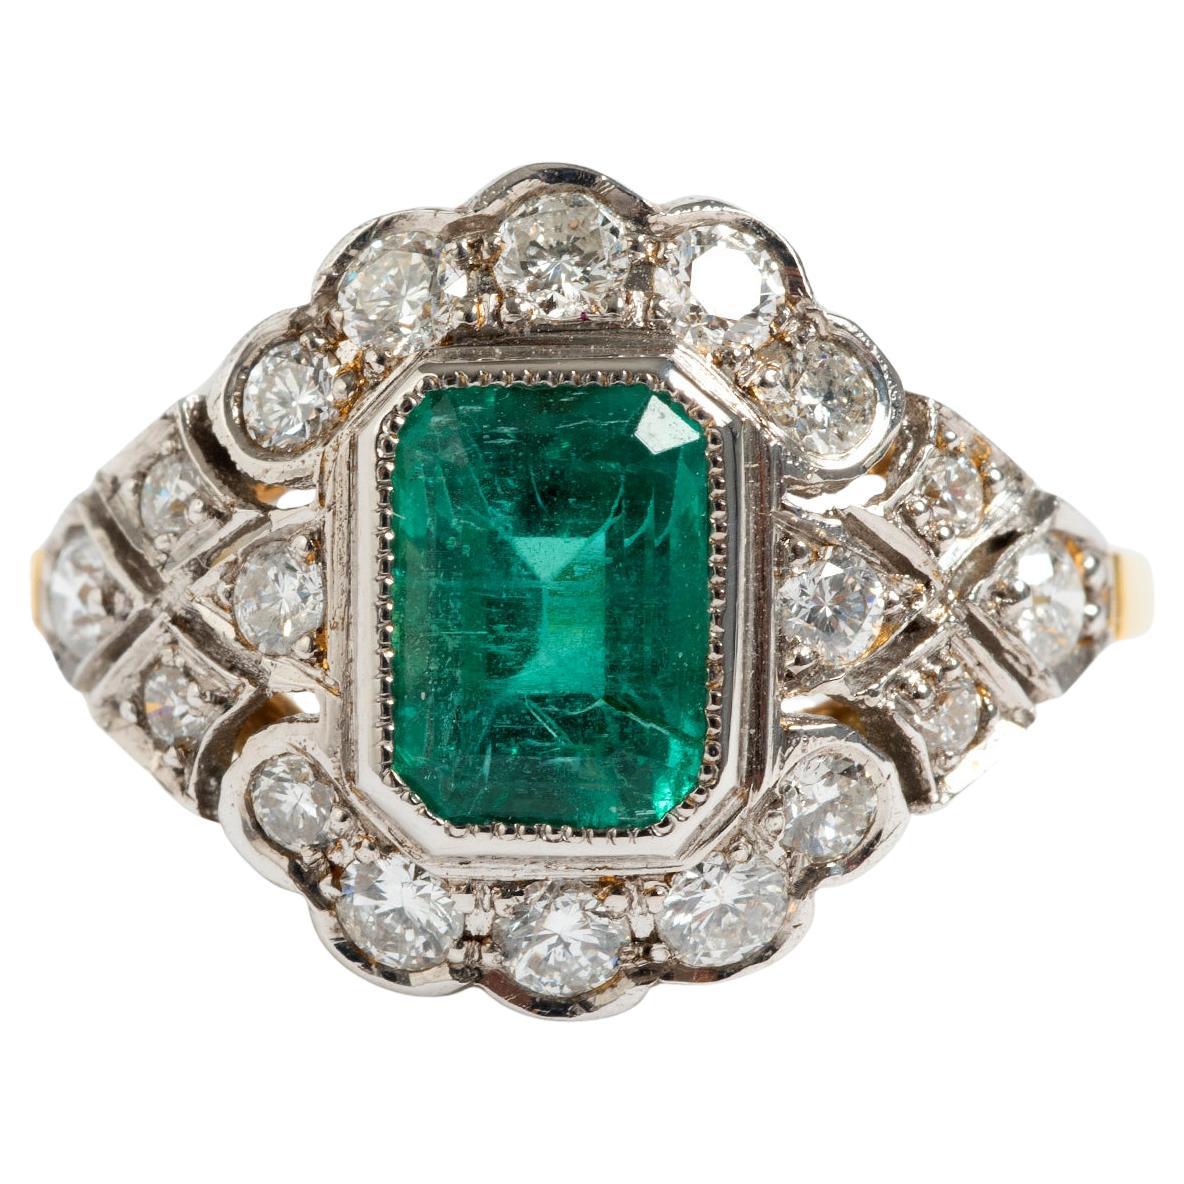 Emerald (est 1.20ct) & Diamond (est .60ct) Cluster Ring, 18K Yellow Gold ... For Sale